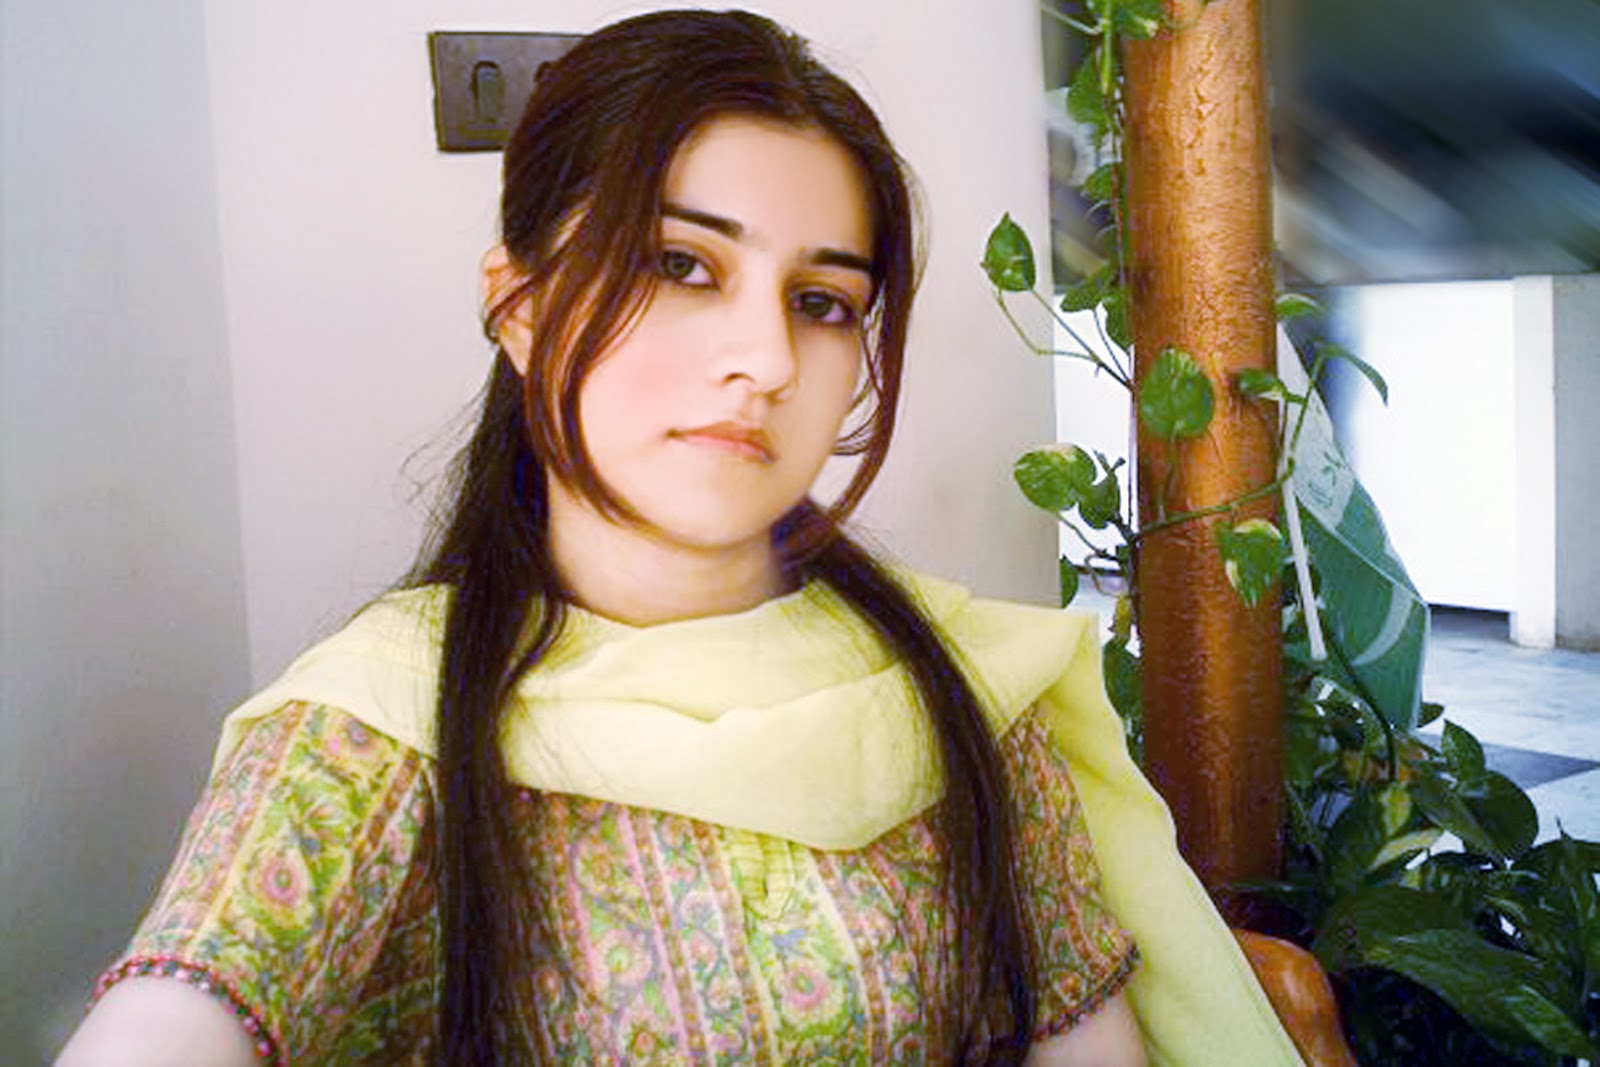 This Is The Image Of Gorgeous Pakistani Girl Wallpaper